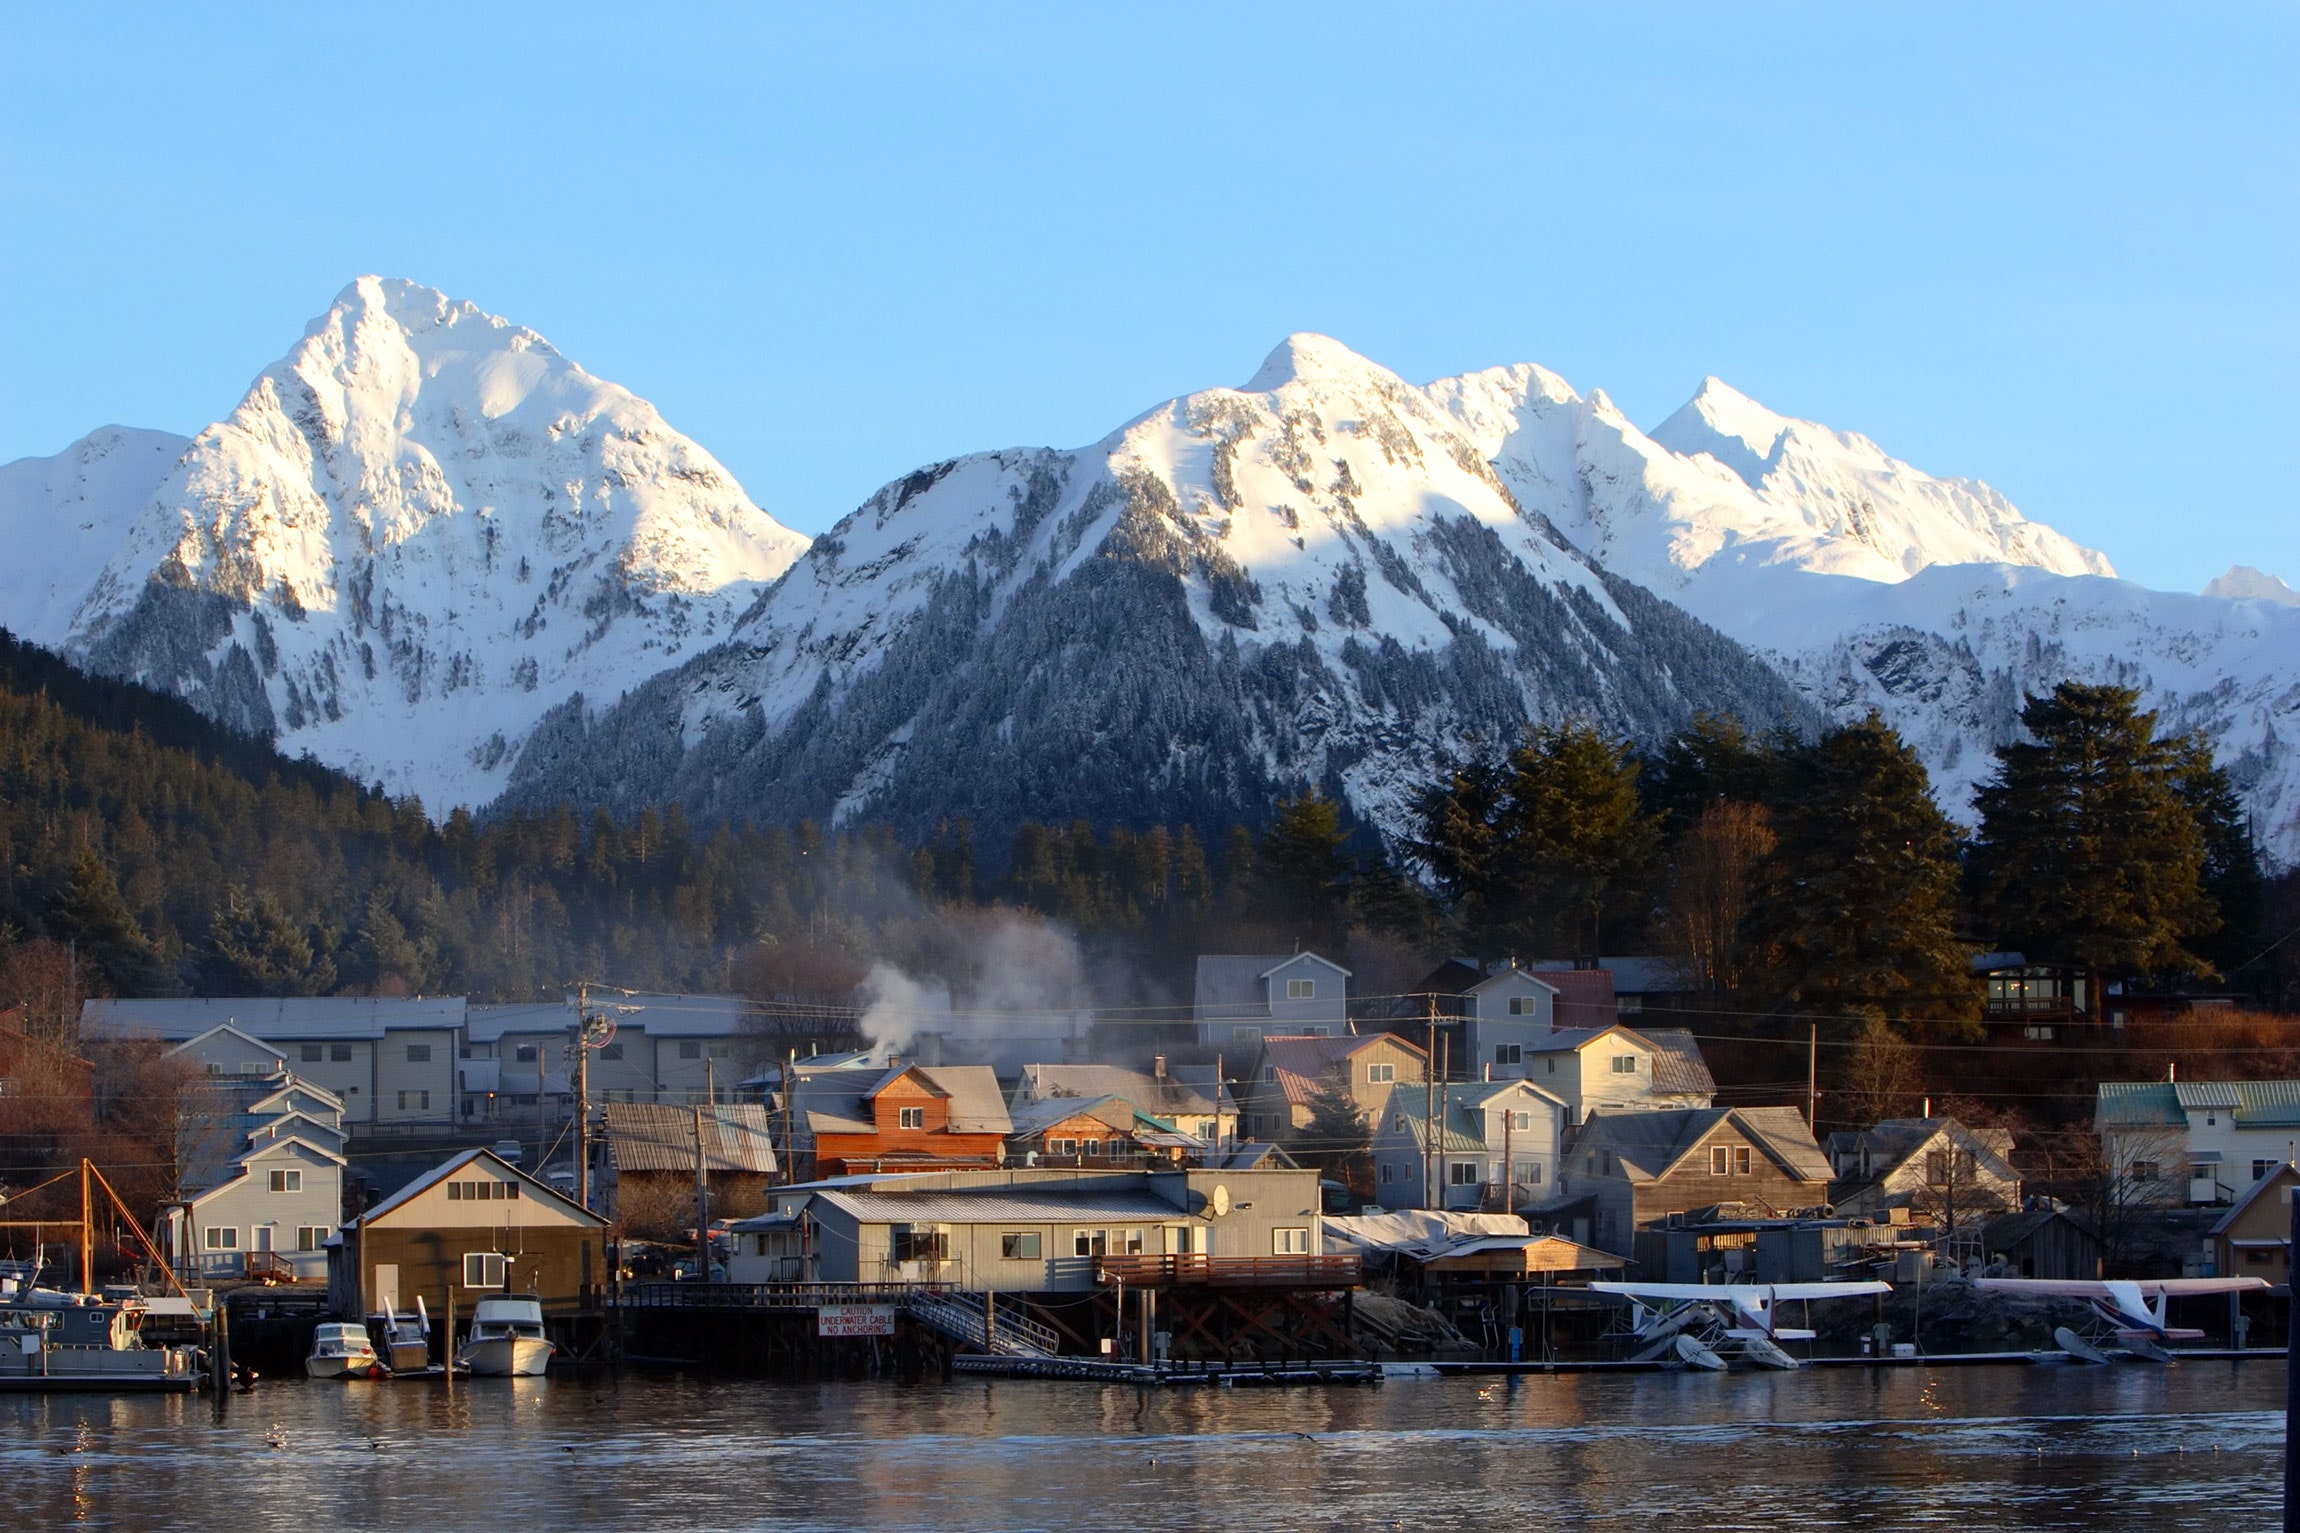 The 25 Best Small Towns in America